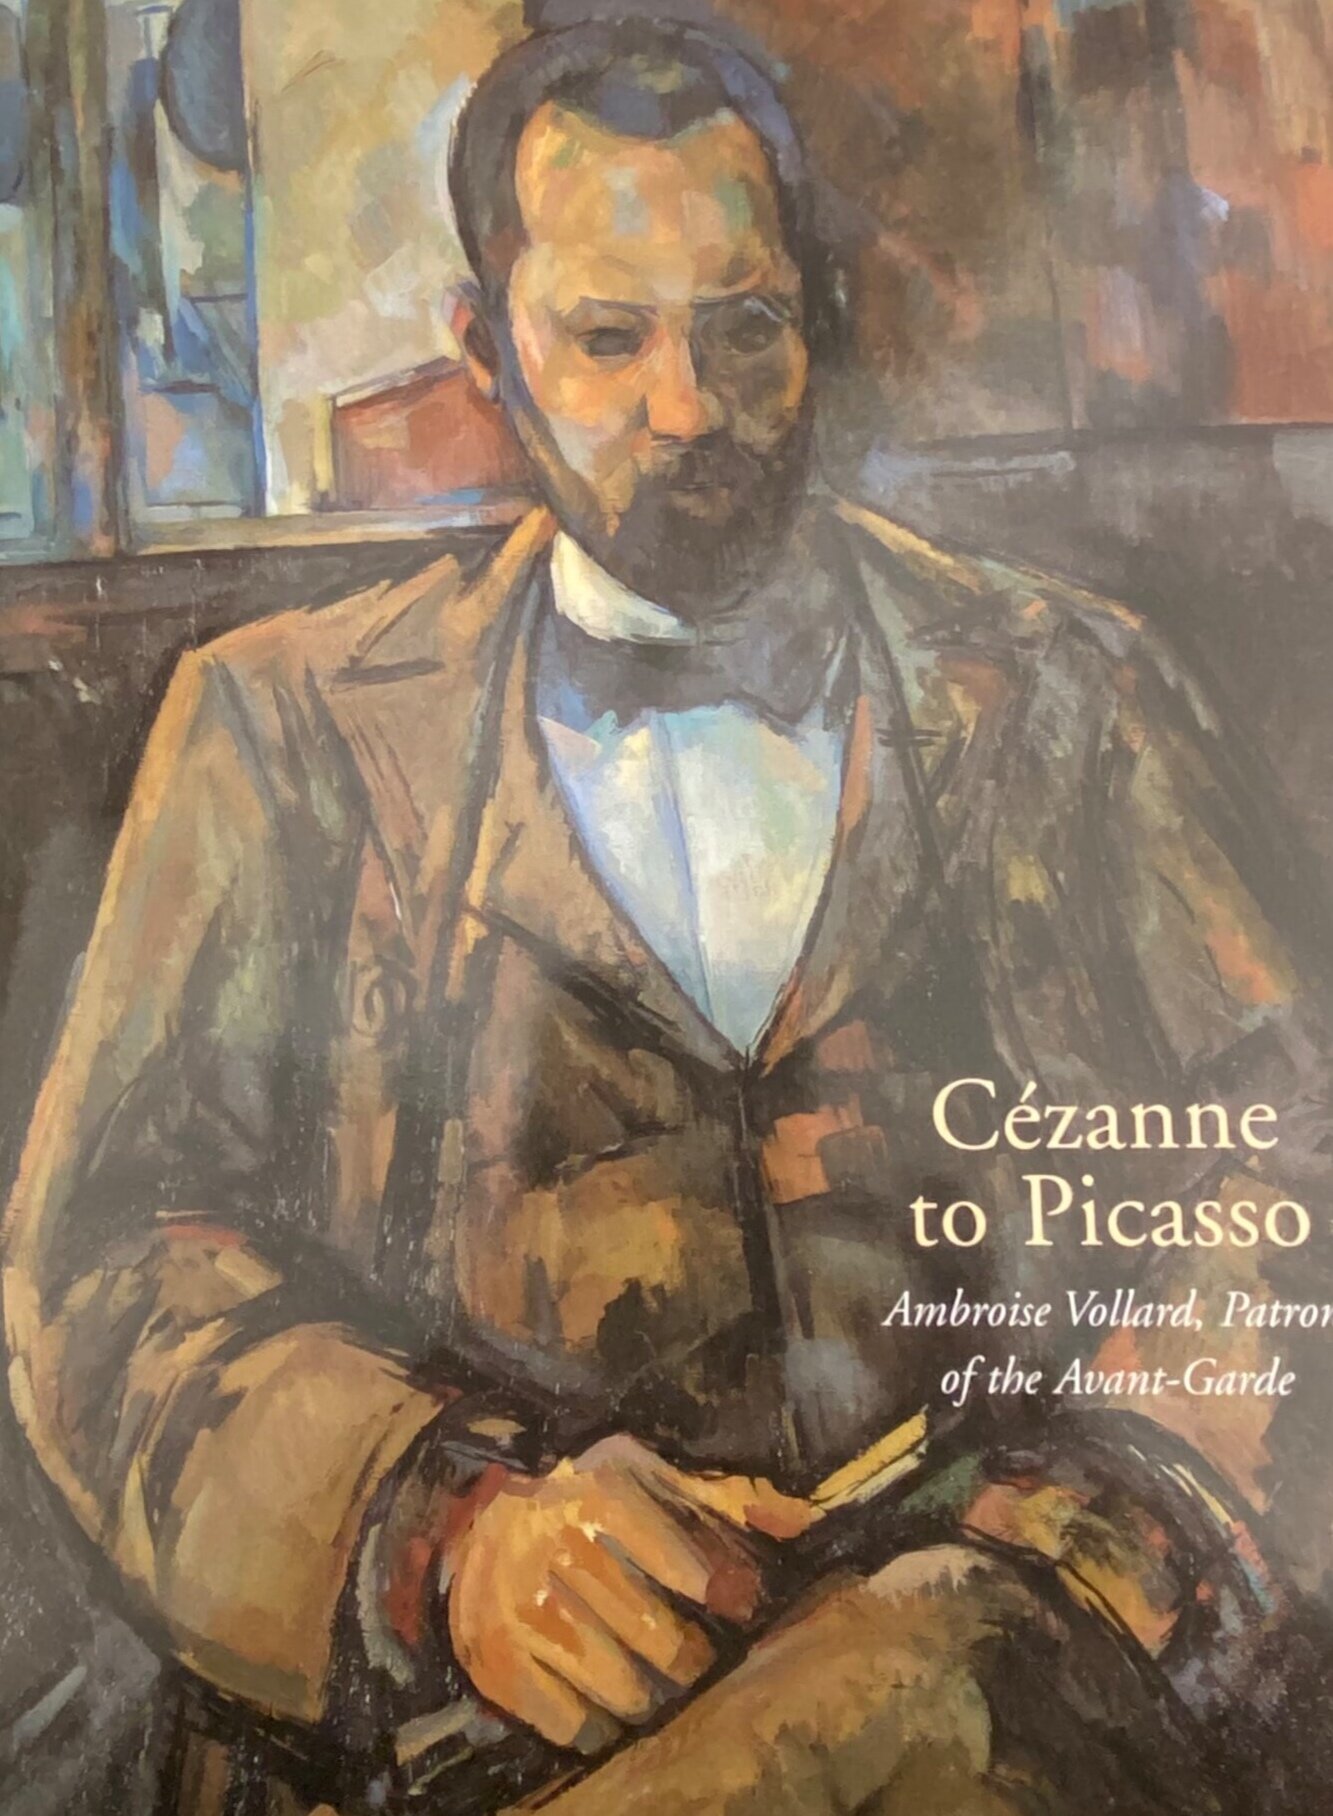 Cézanne to Picasso, Ambroise Vollard, Patron of the Avant-Garde, 2007